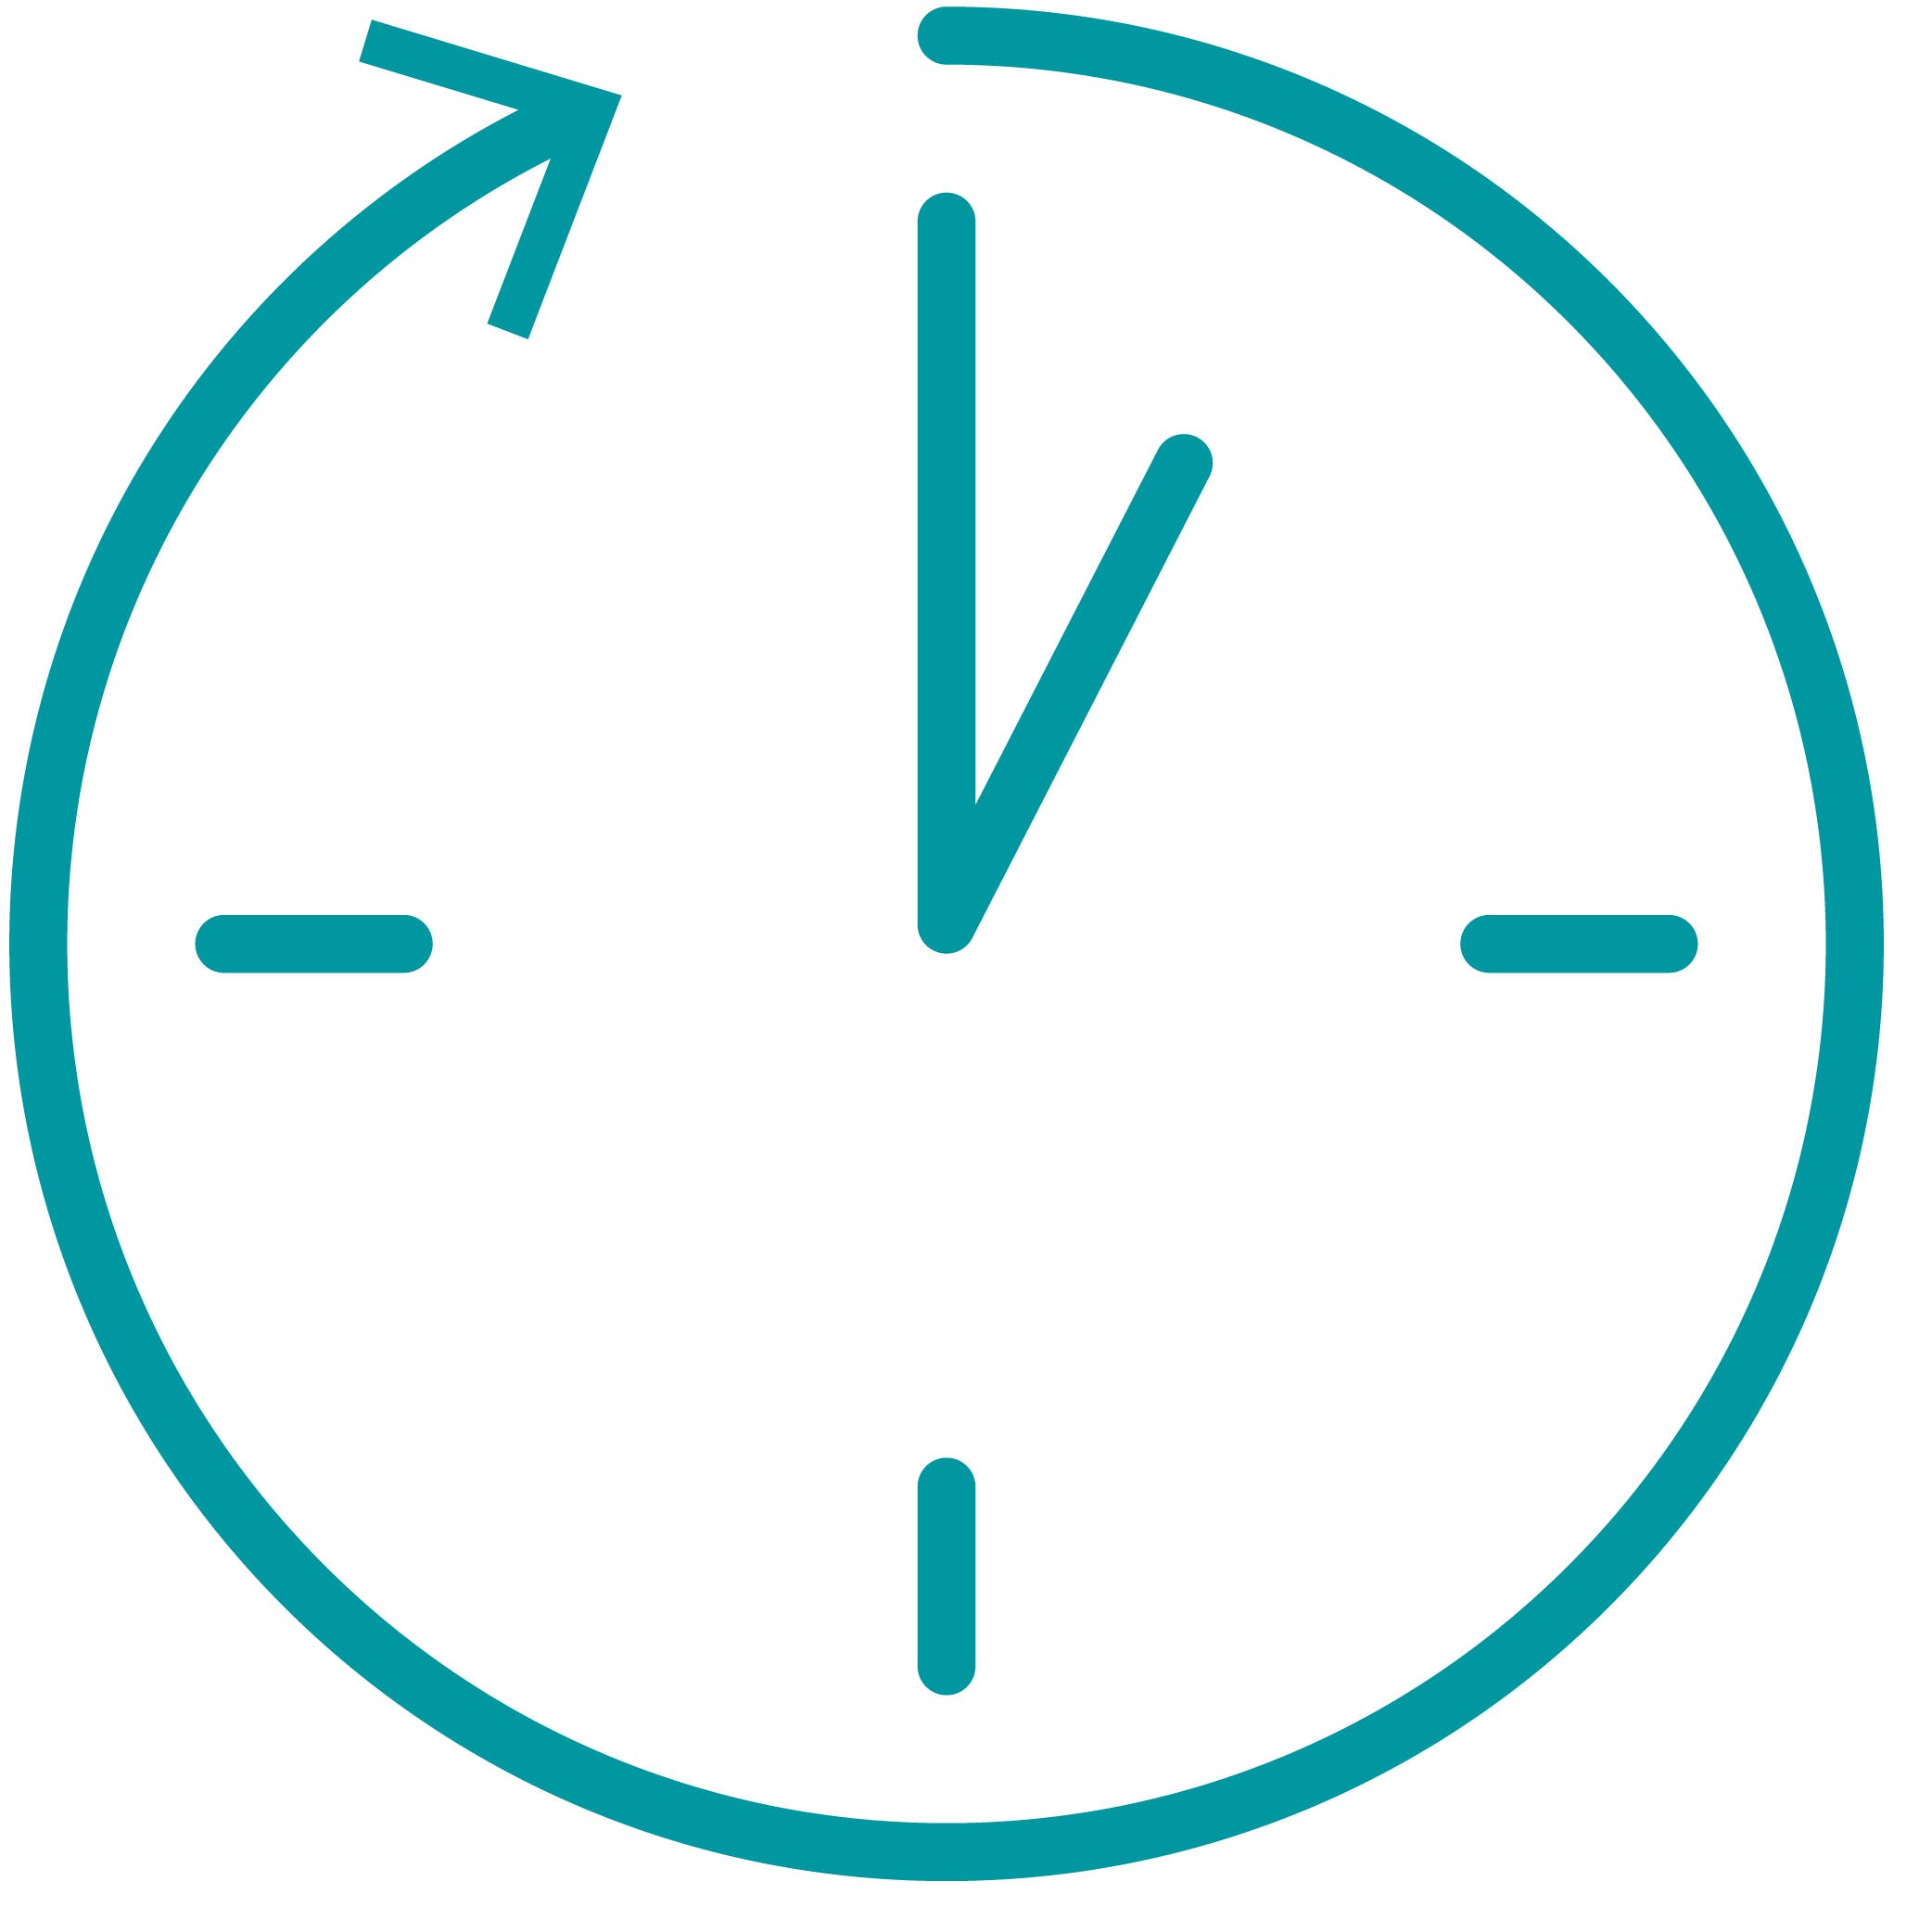 Clock face icon with circle arrow forming the frame of the clock face